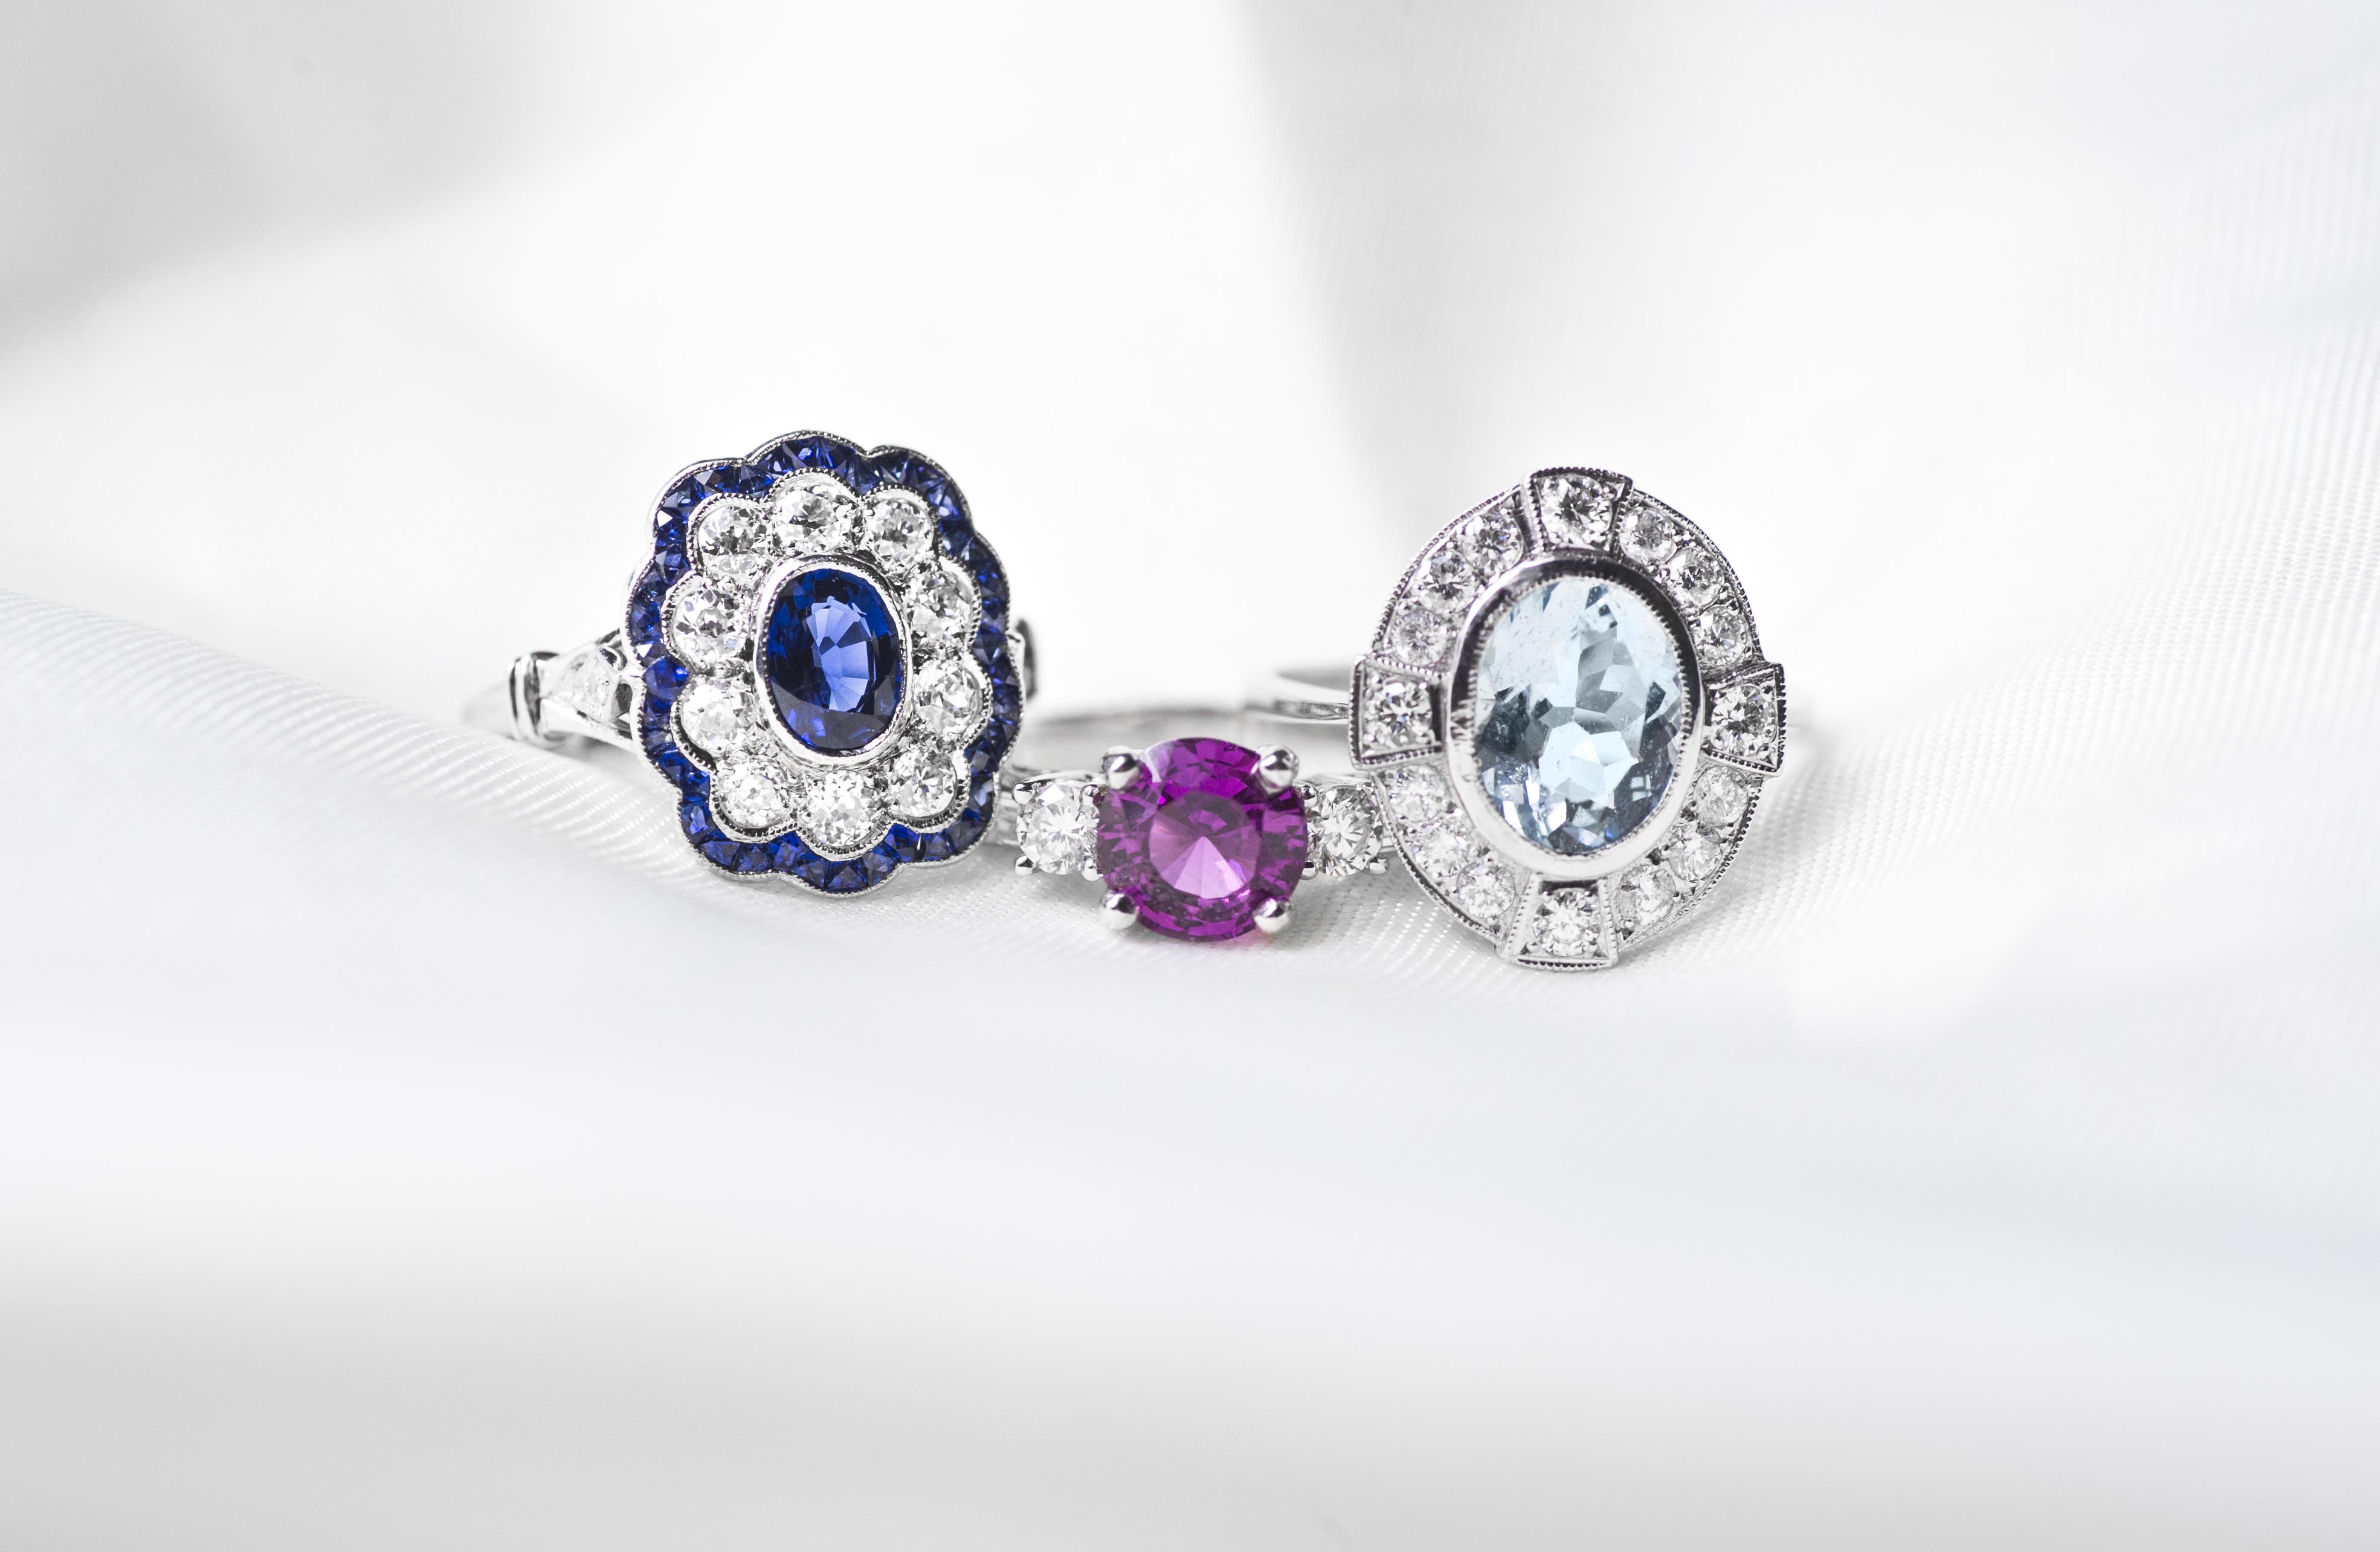 Three white gold engagement rings centered with colored gemstones on a white background.